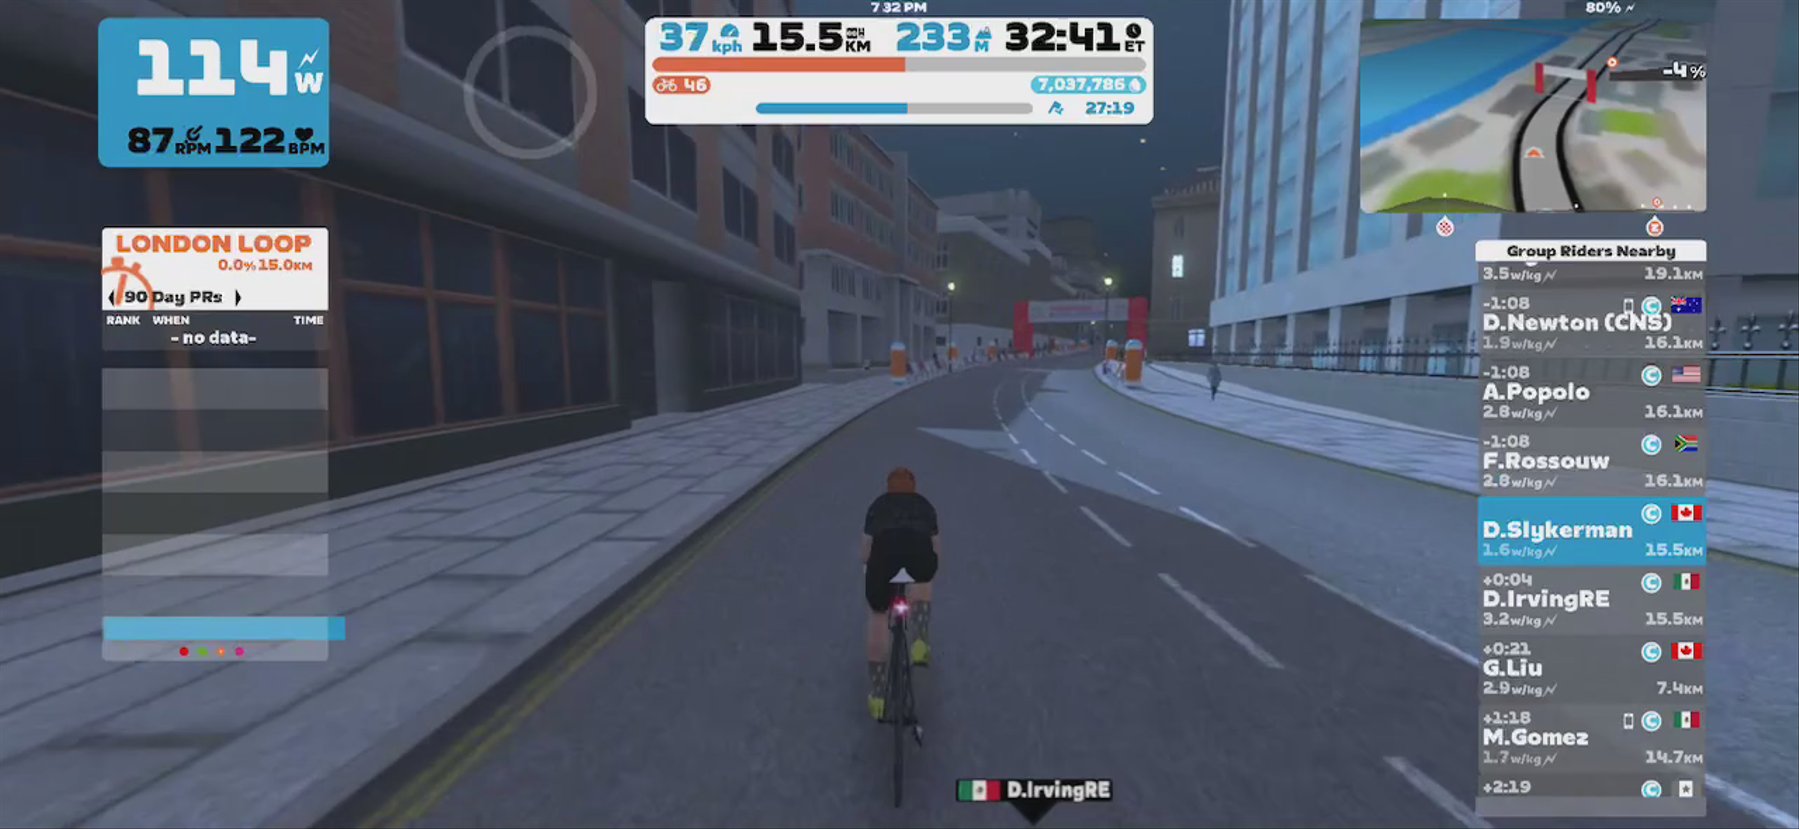 Zwift - Group Ride: bet-at-home Midweek Ride (C) on London Loop in London